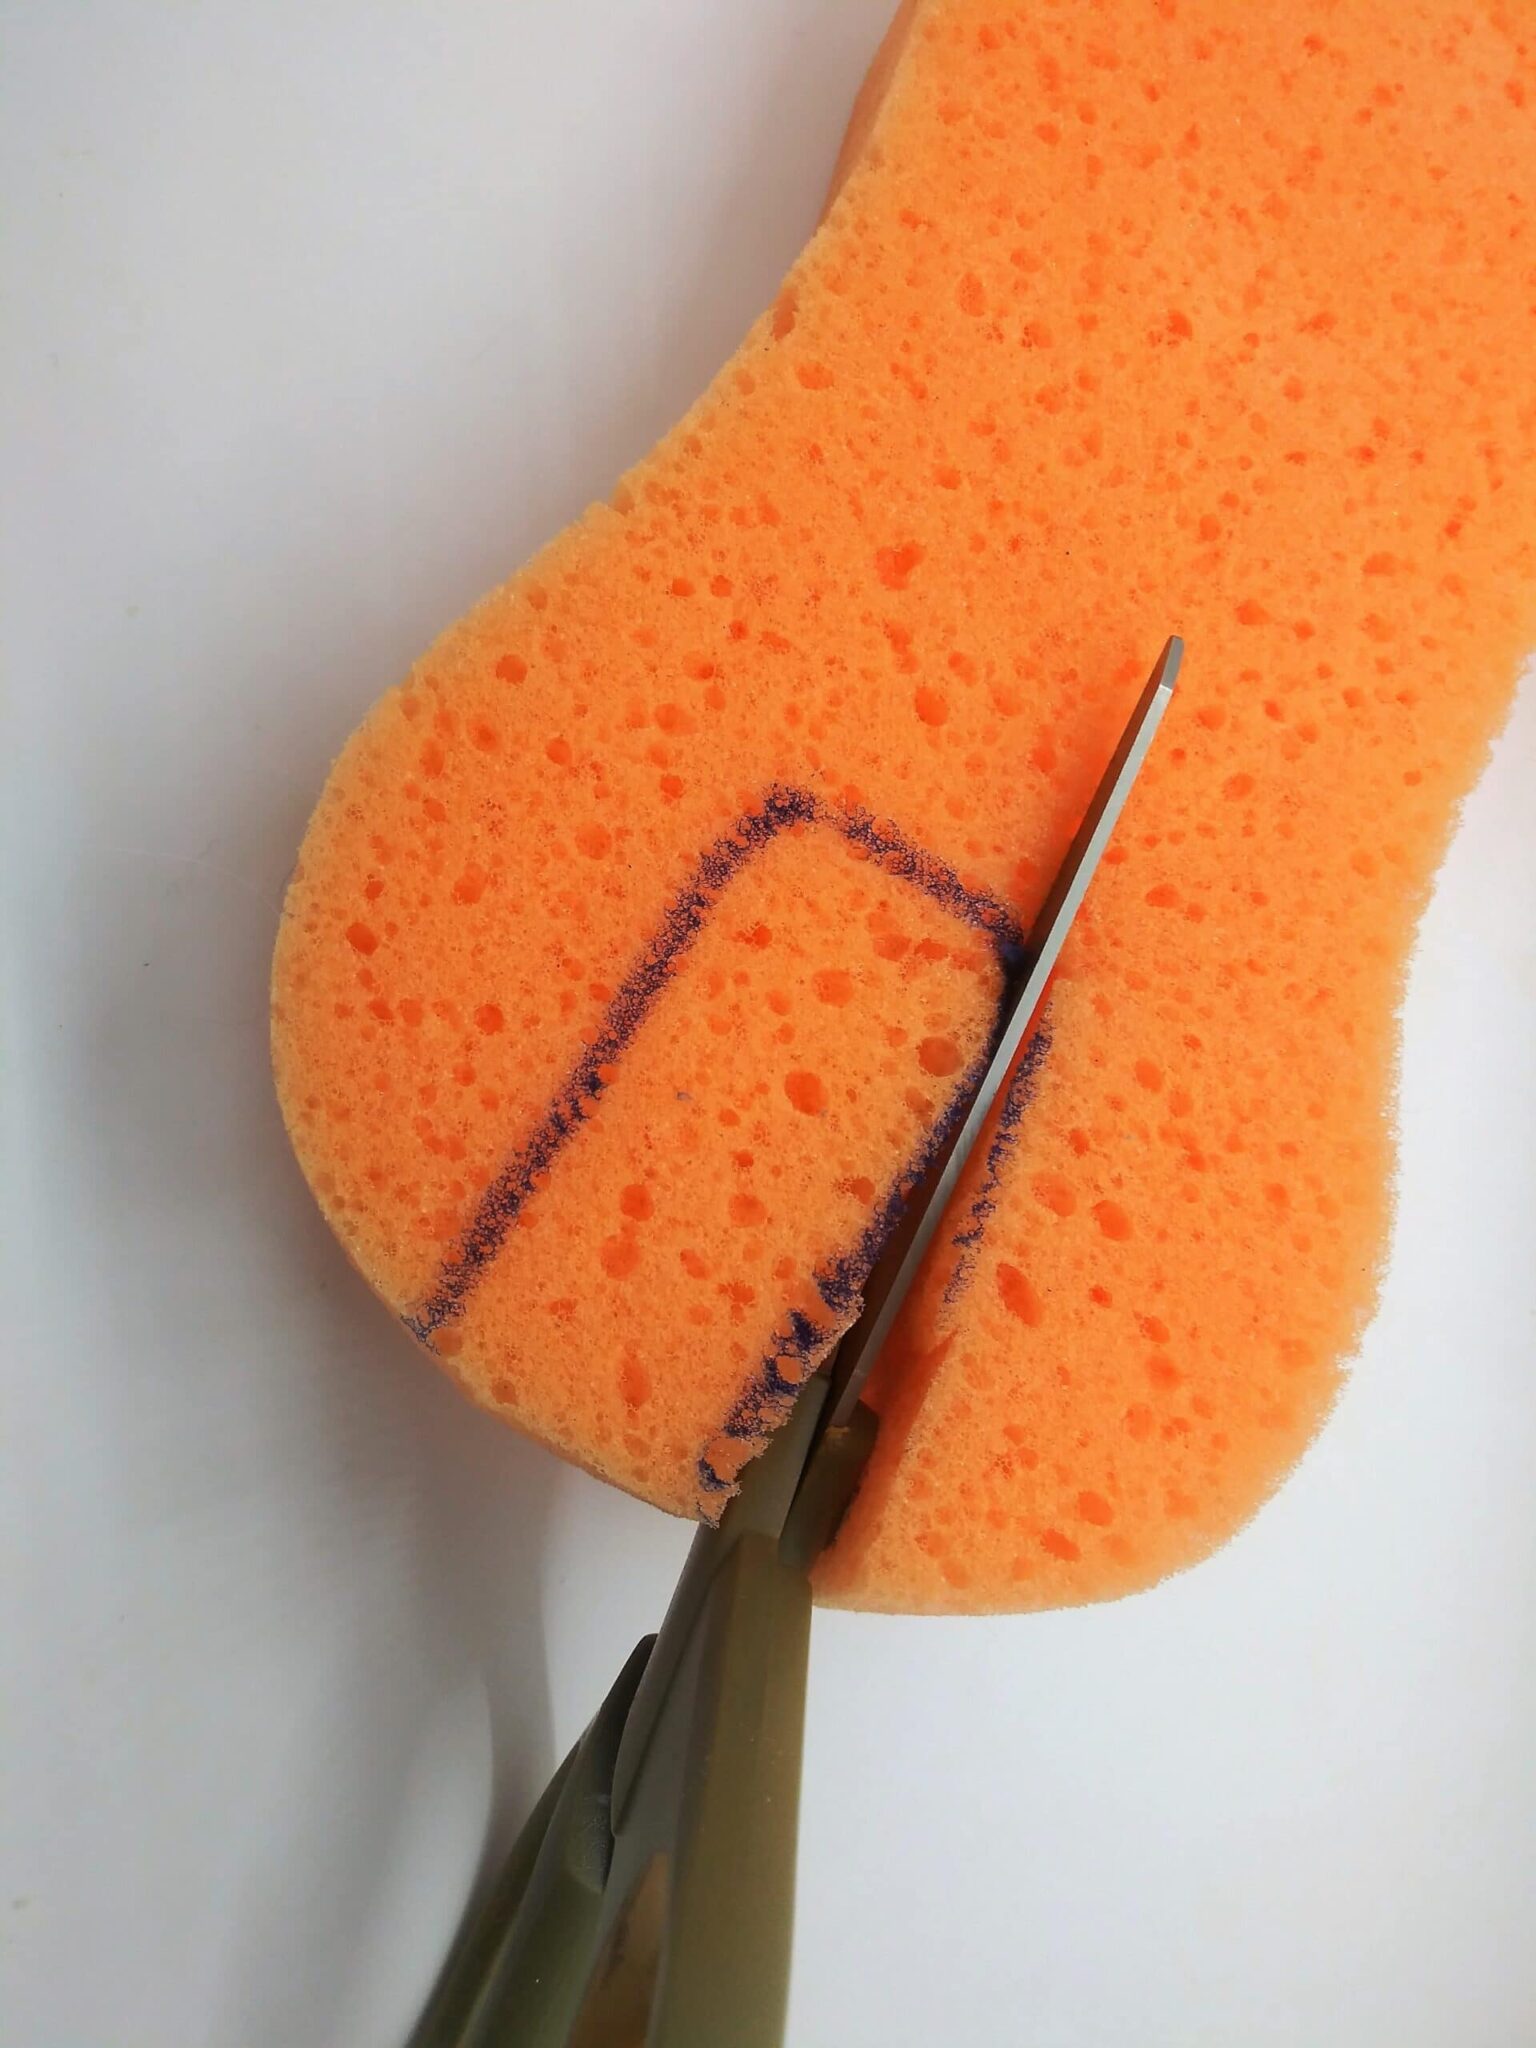 How to made an anal toy from a hairbrush. Step 3 photo of an area being cut from a sponge with scissors.